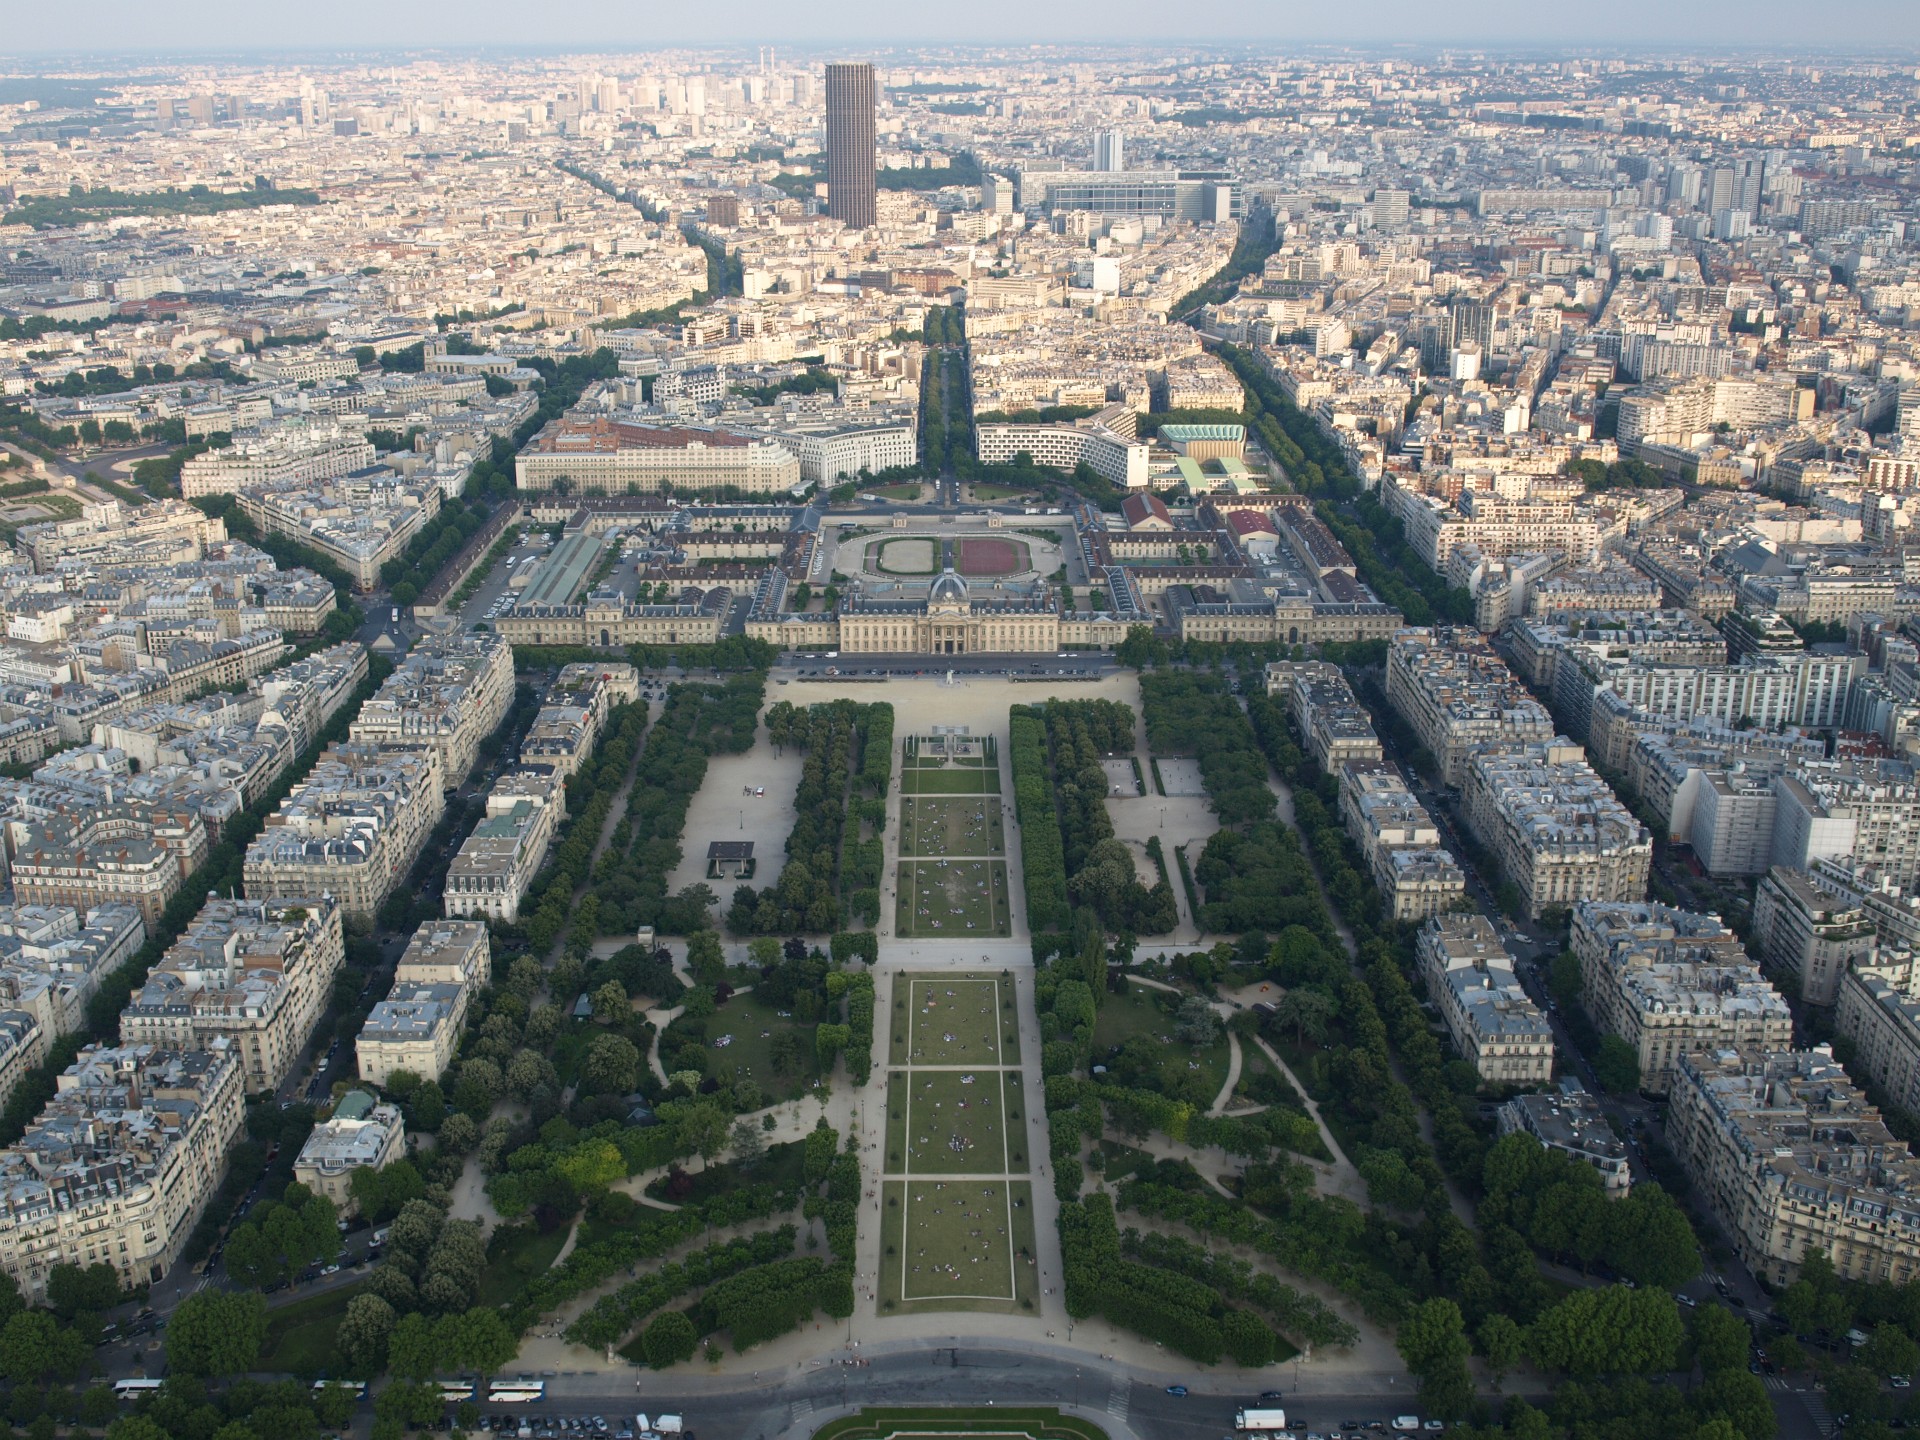 Greenway to the Ecole Militaire